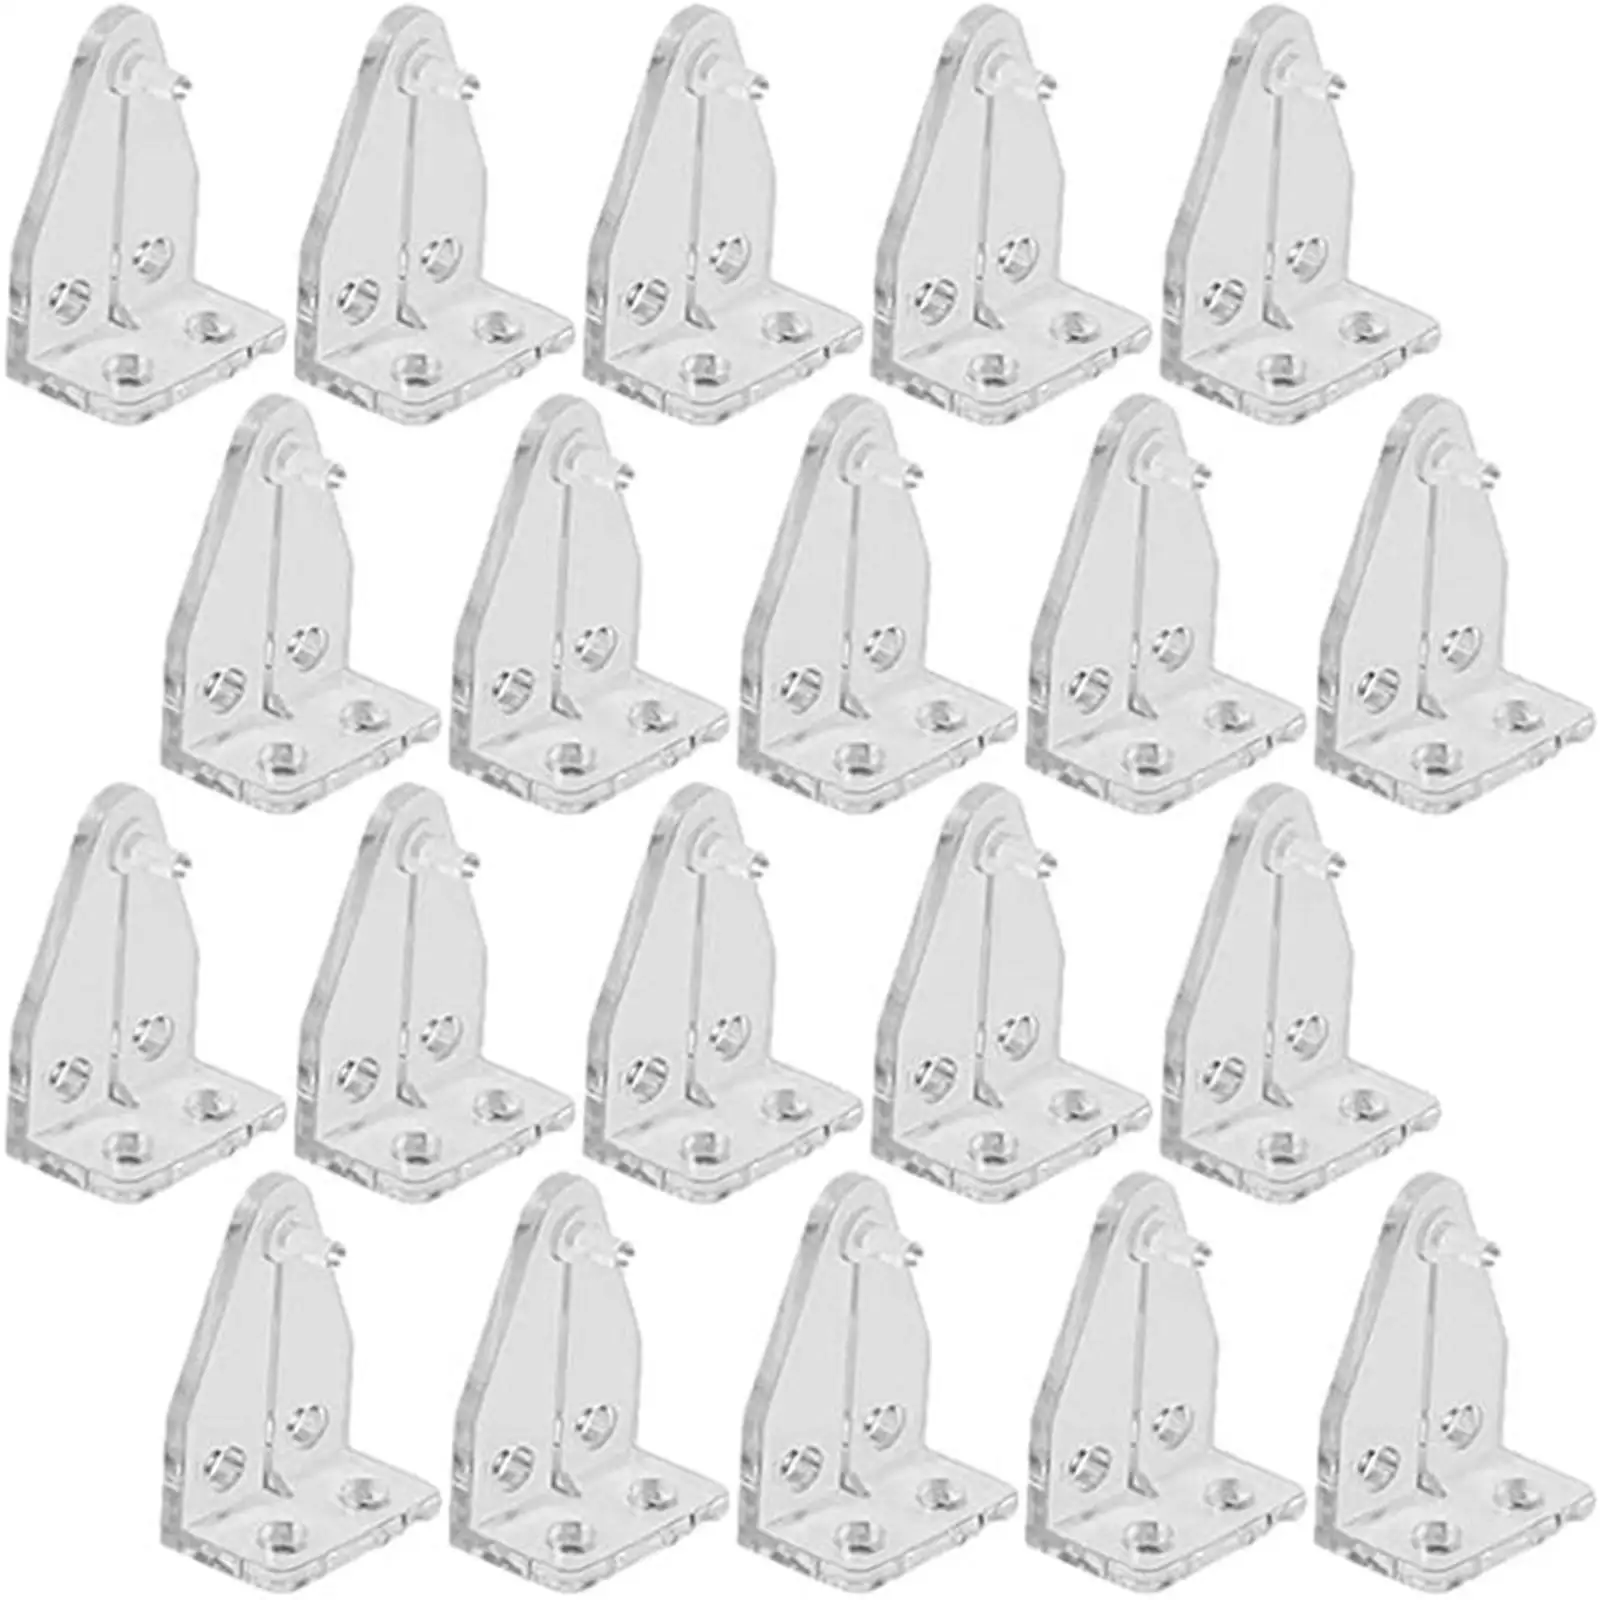 20Pcs  Positioning Hooks Clear Bracket Connector for Roller Shutters